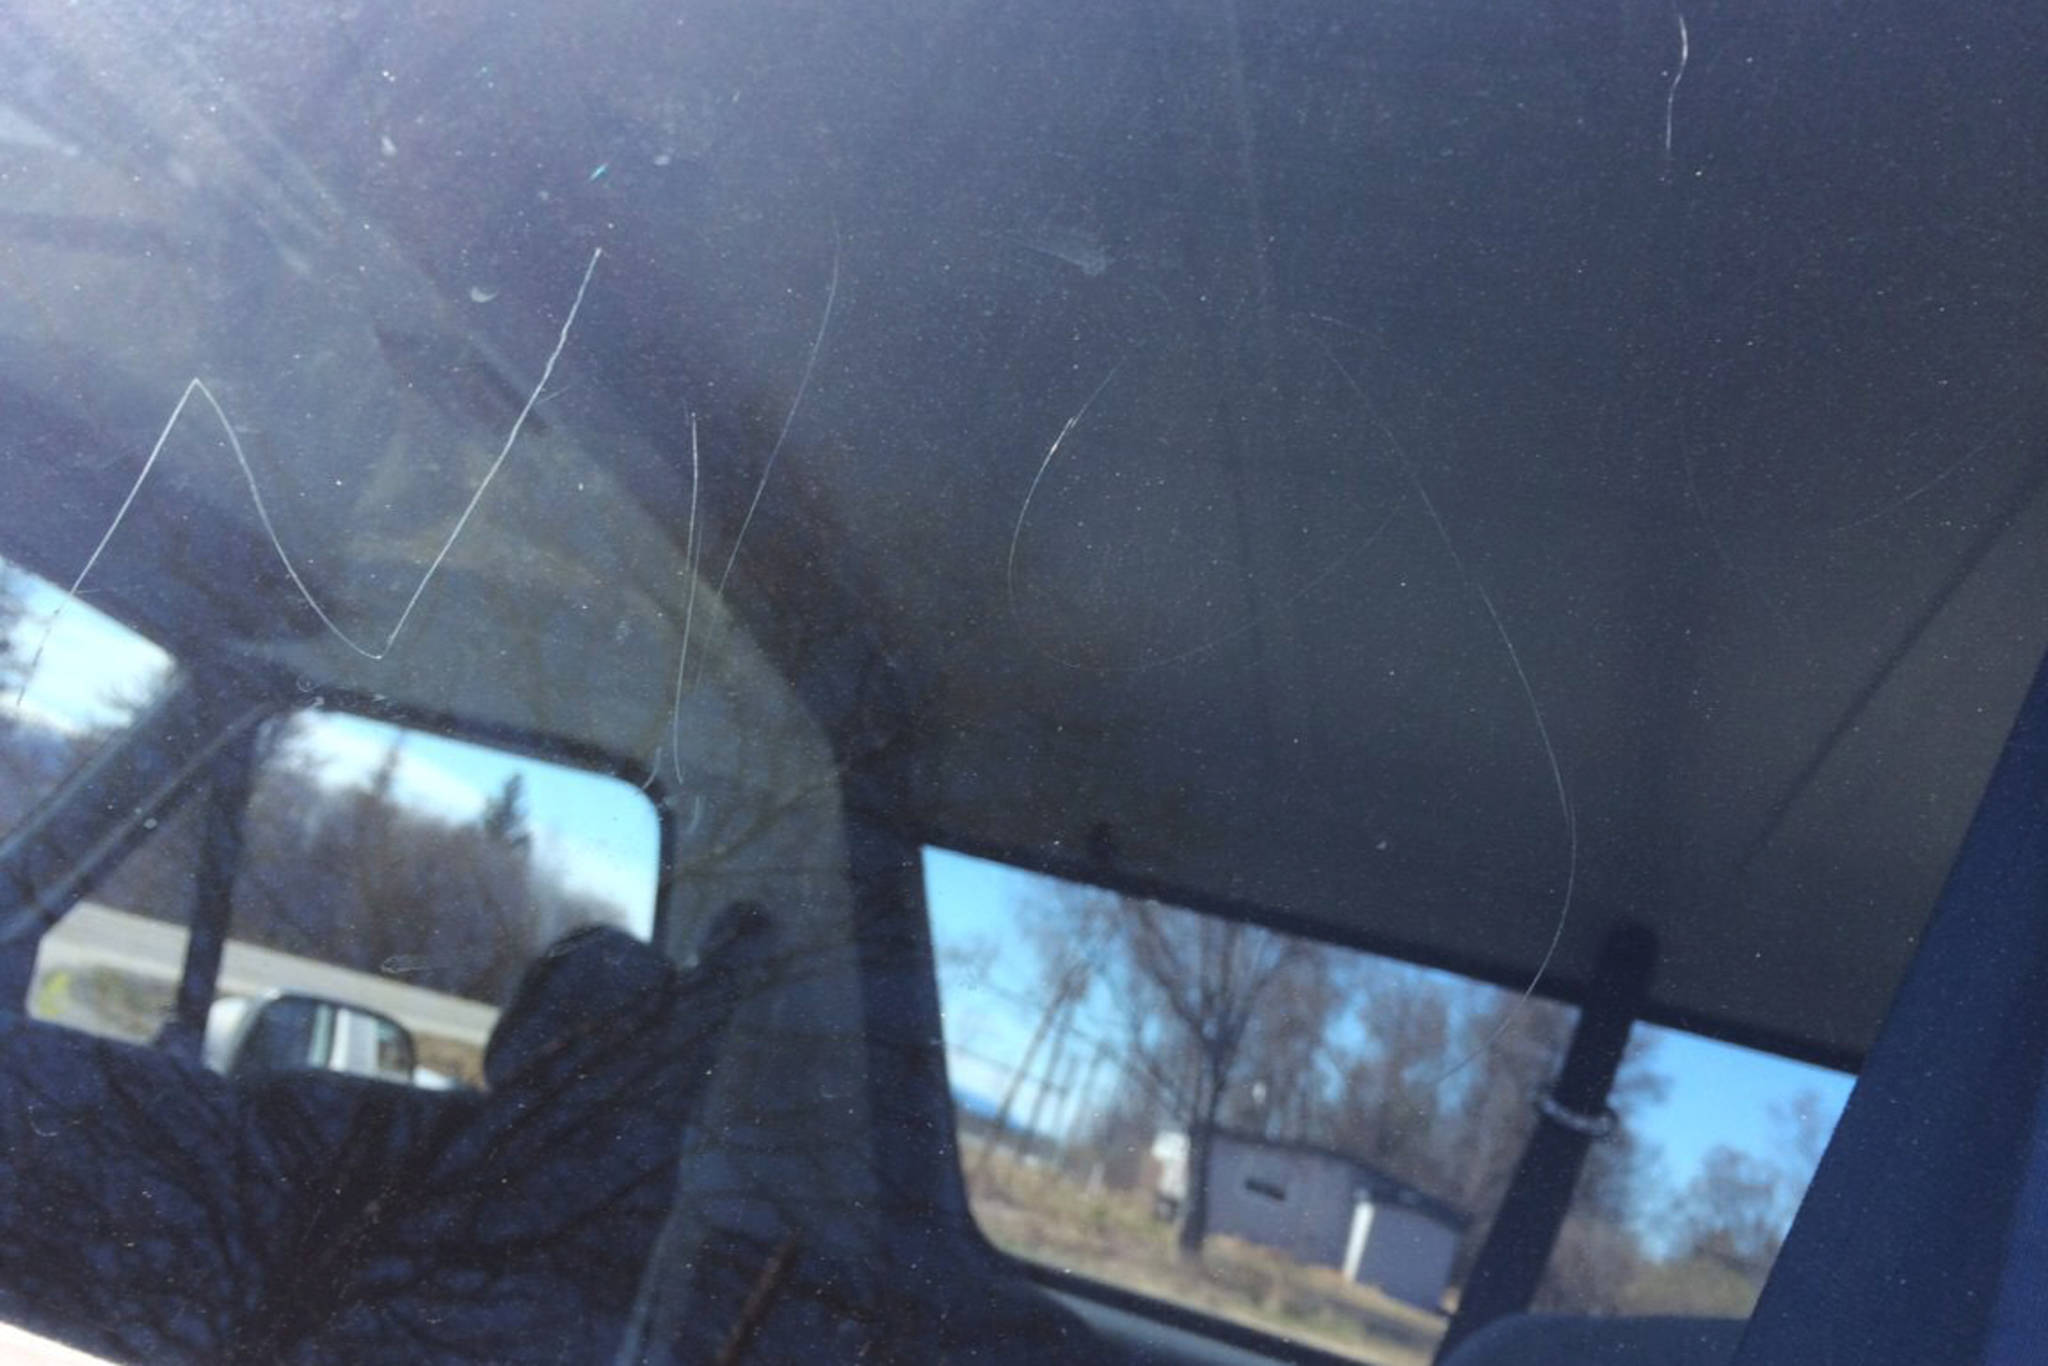 The N-word was scrawled into the window of a white Ford Bronco at Dave’s Auto Repair, shown here Friday, April 26, 2019 just outside of Homer, Alaska. (Photo courtesy Dave Johnson)